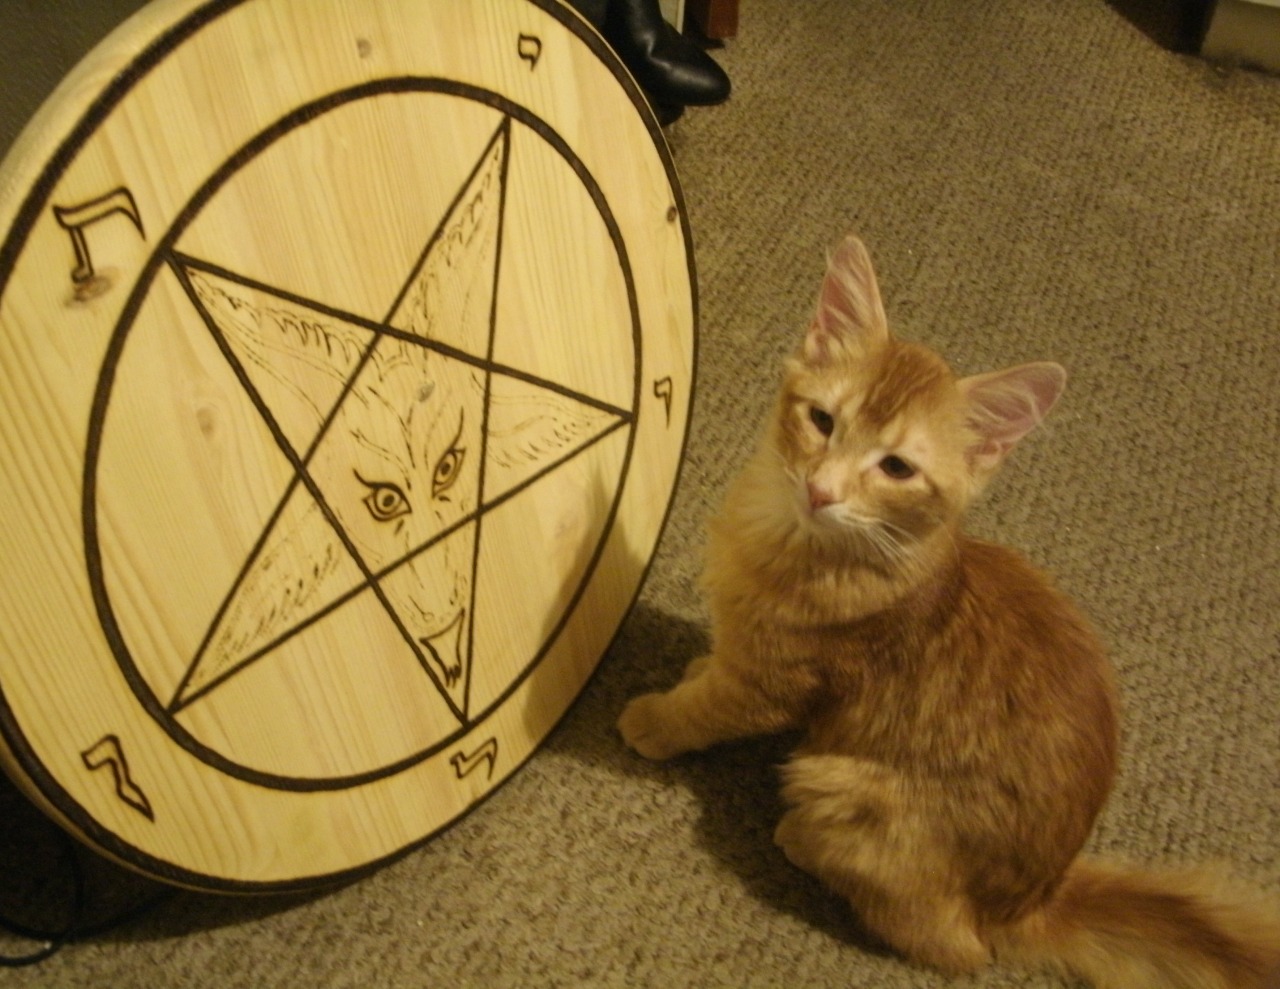 Cyrus, inspecting the progress on the burning of a new Sigil of Baphomet.
~ Witch Hydra M. Star of Infernal Ink Magazine and The Burning Witch.